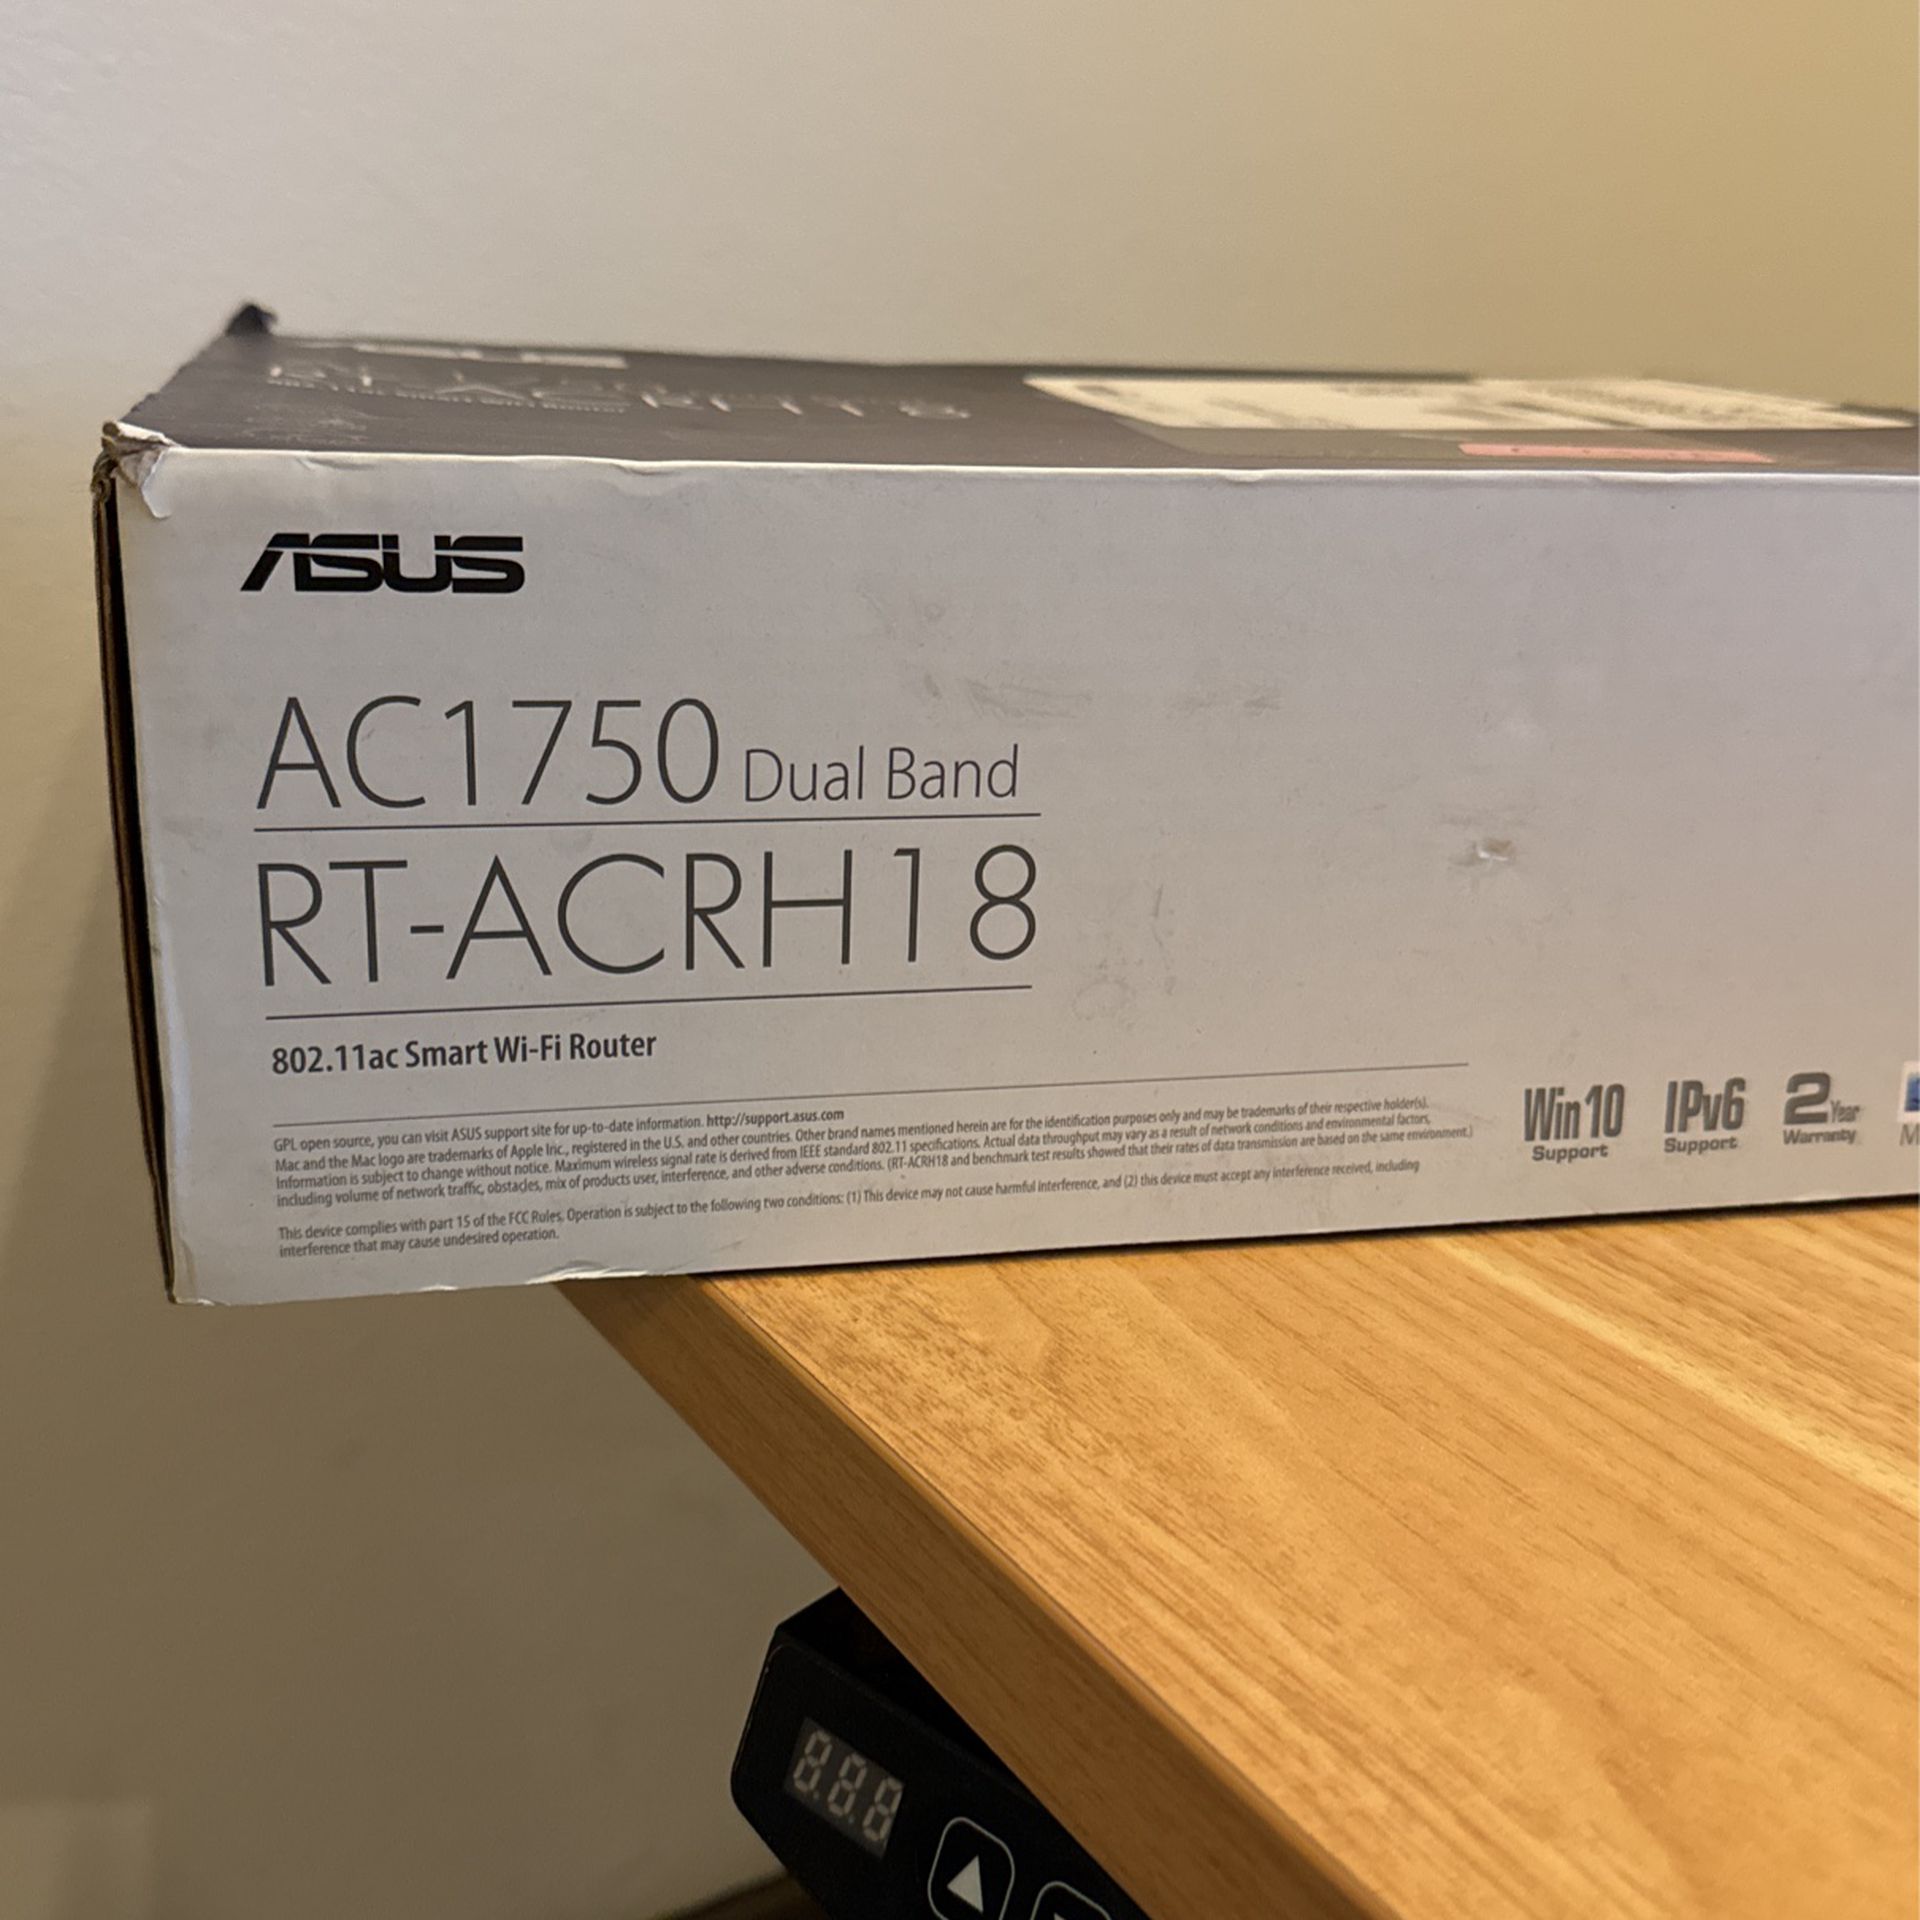 Asus AC1750 WiFi Router